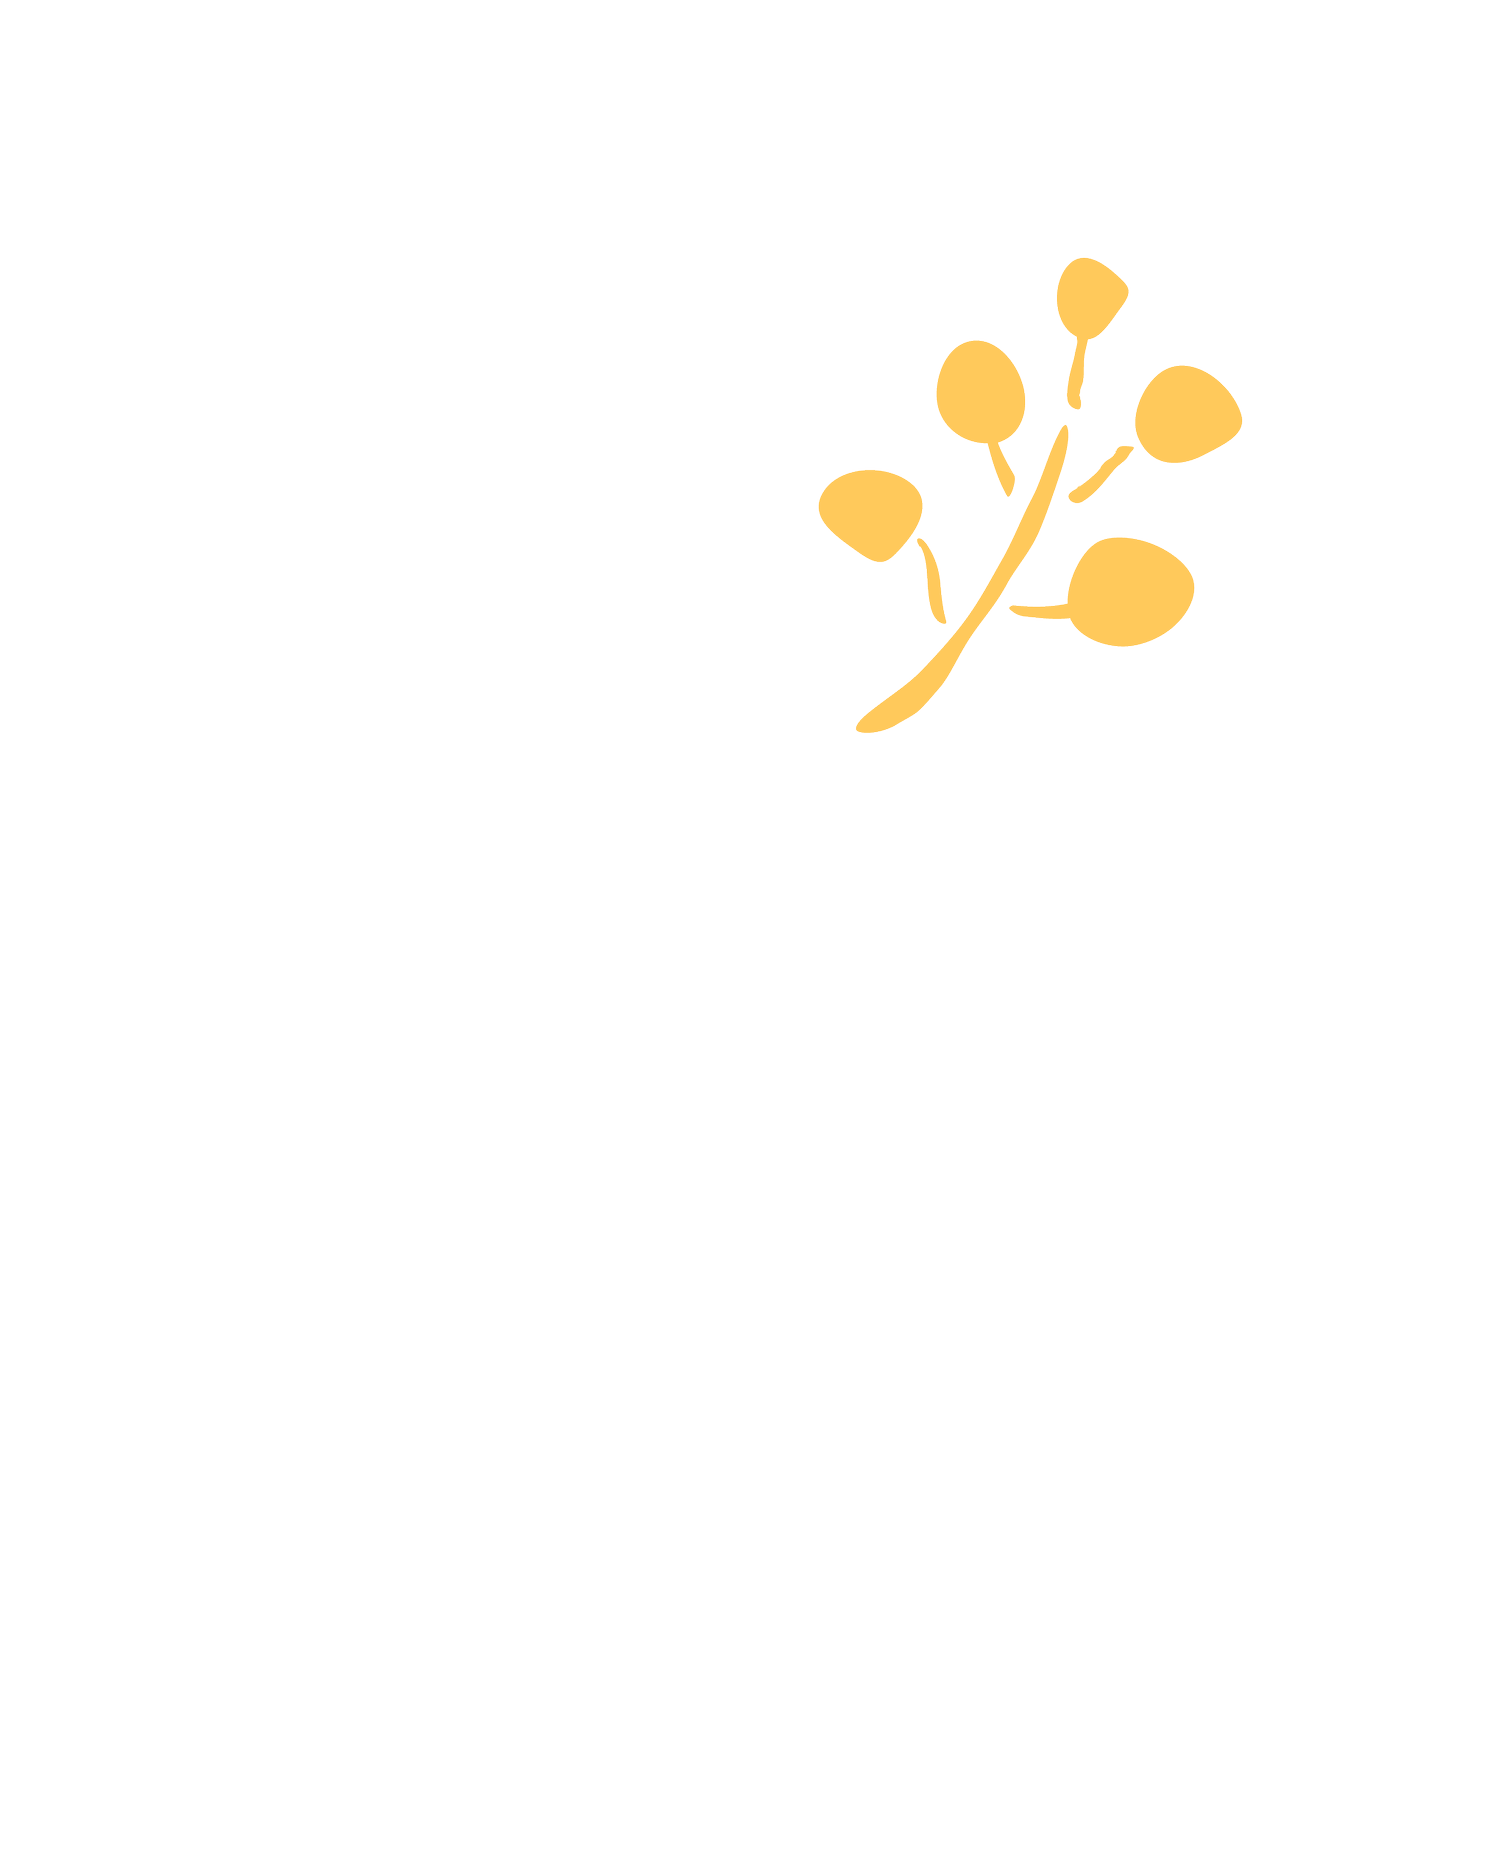 Youth Psychologist Wollongong | The Wattle Tree Clinic